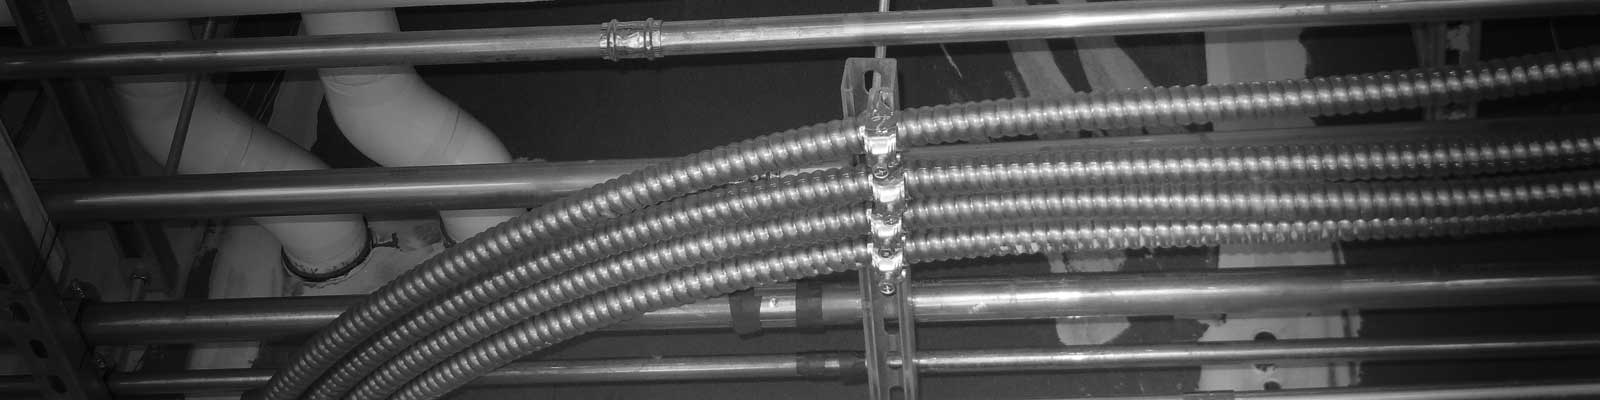 Feeder MC armored electrical cable run next to traditional conduit